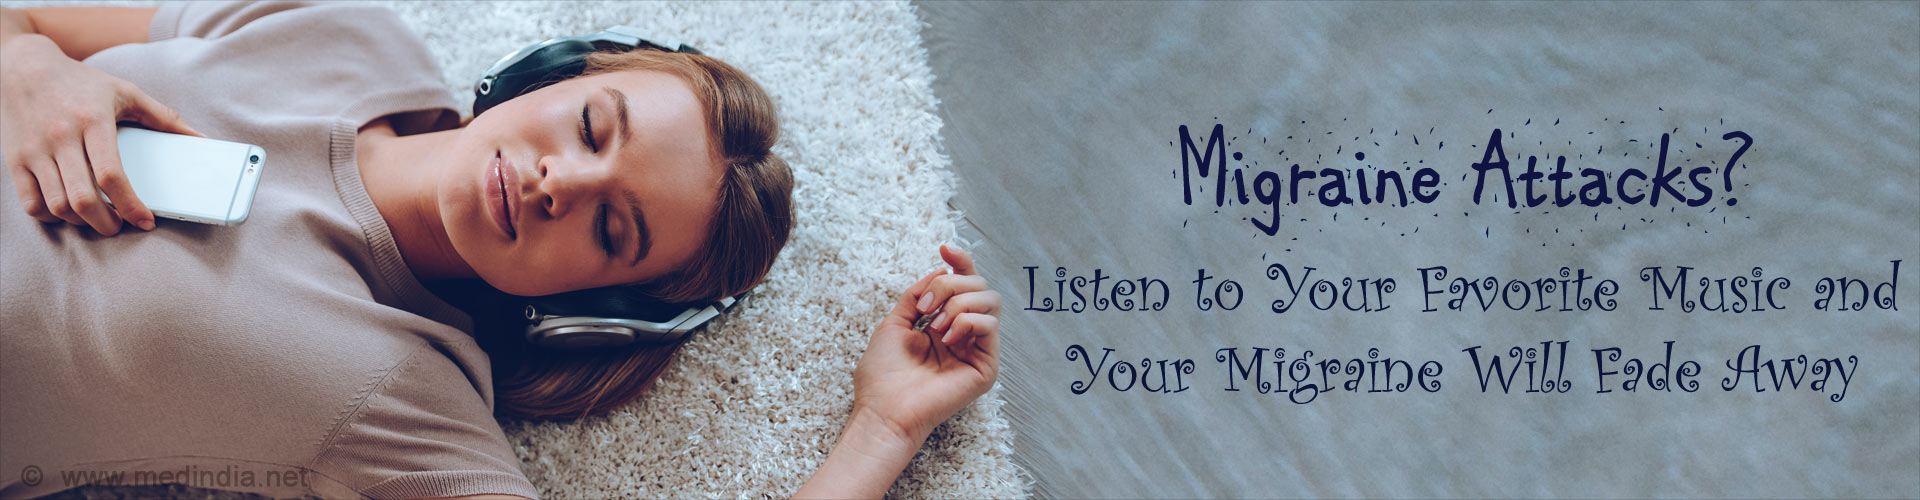 Migraine Attacks? Listen to Your Favorite Music and Your Migraine Will Fade Away
